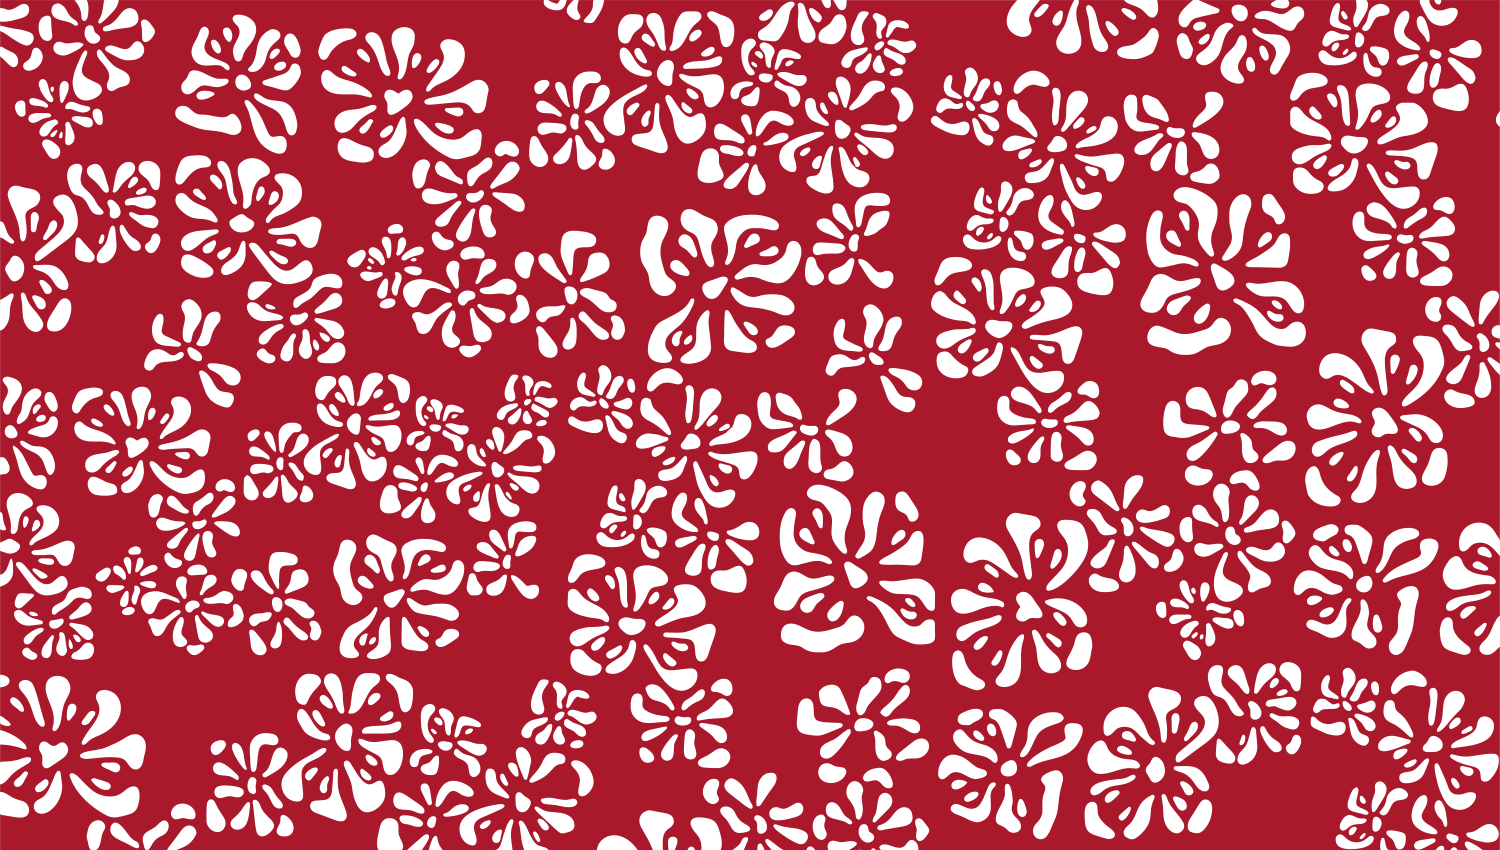 Parasoleil™ Magnolia© pattern displayed with a standard color overlay